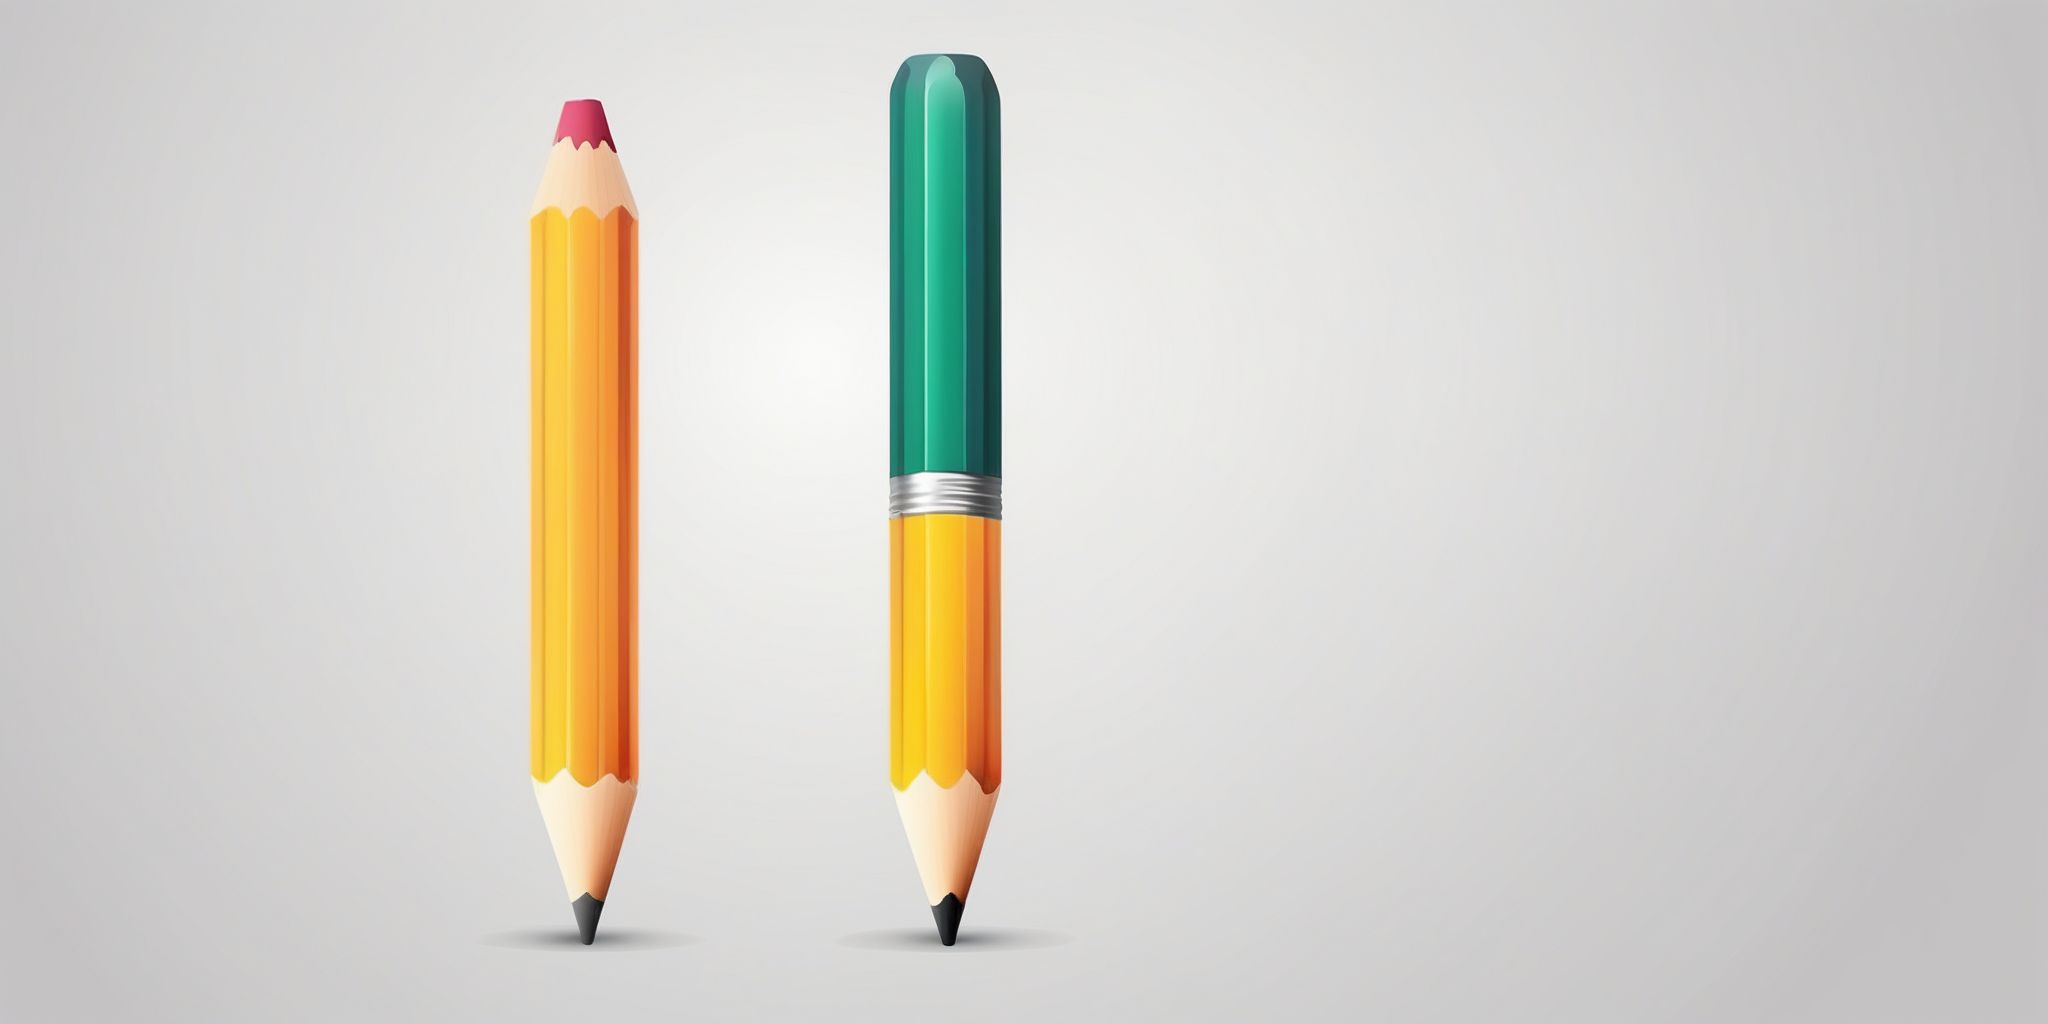 Pencil in illustration style with gradients and white background